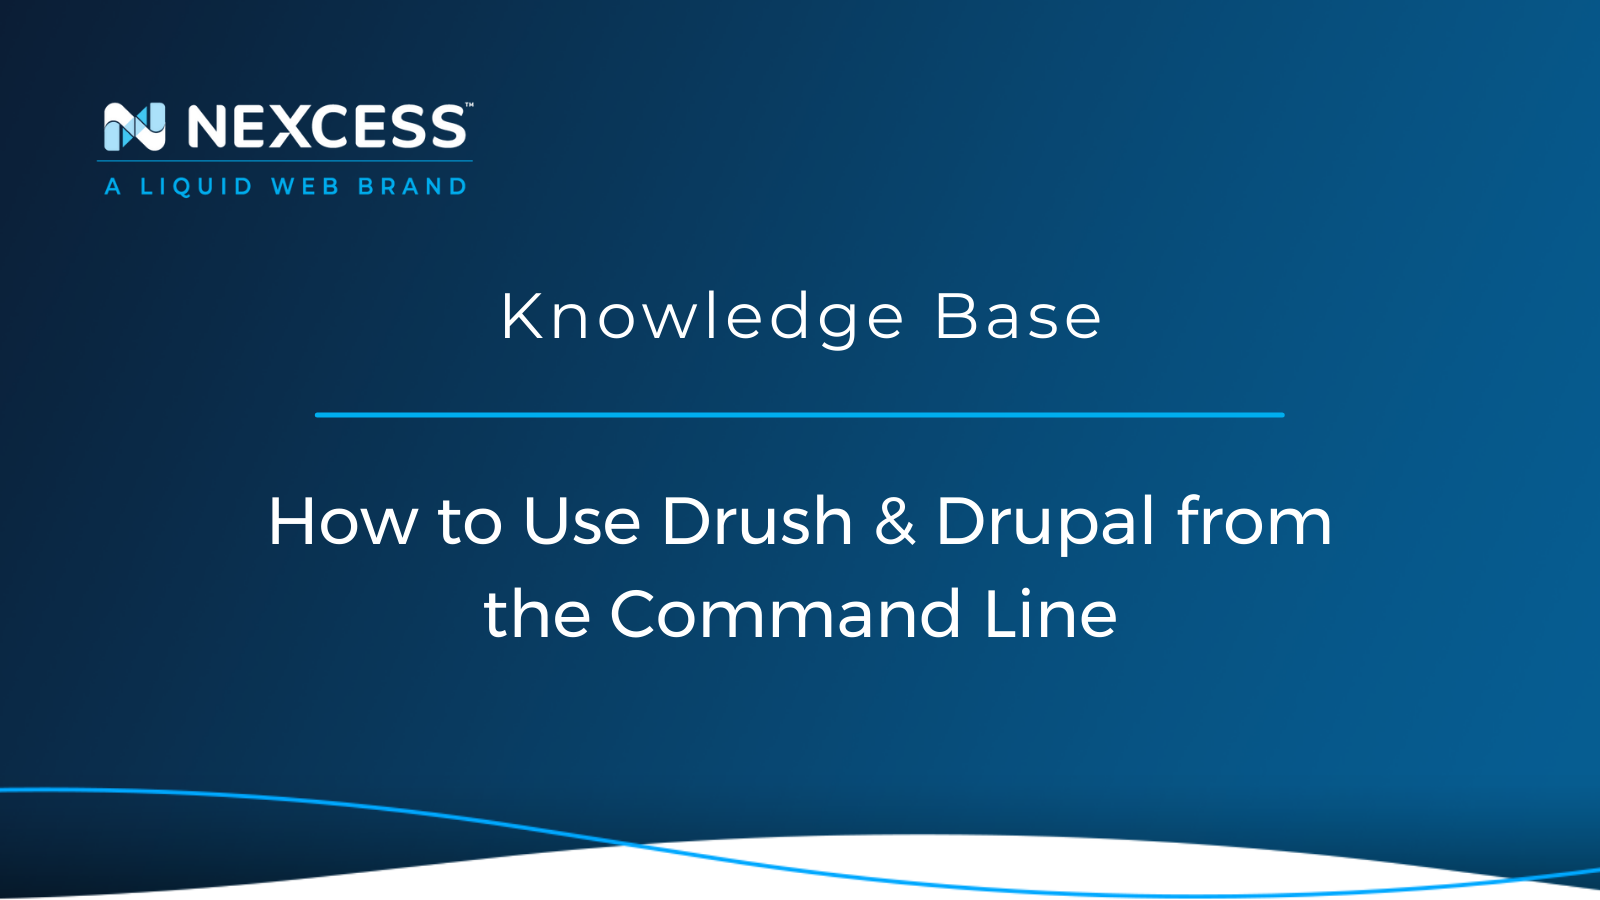 How to Use Drush & Drupal from the Command Line